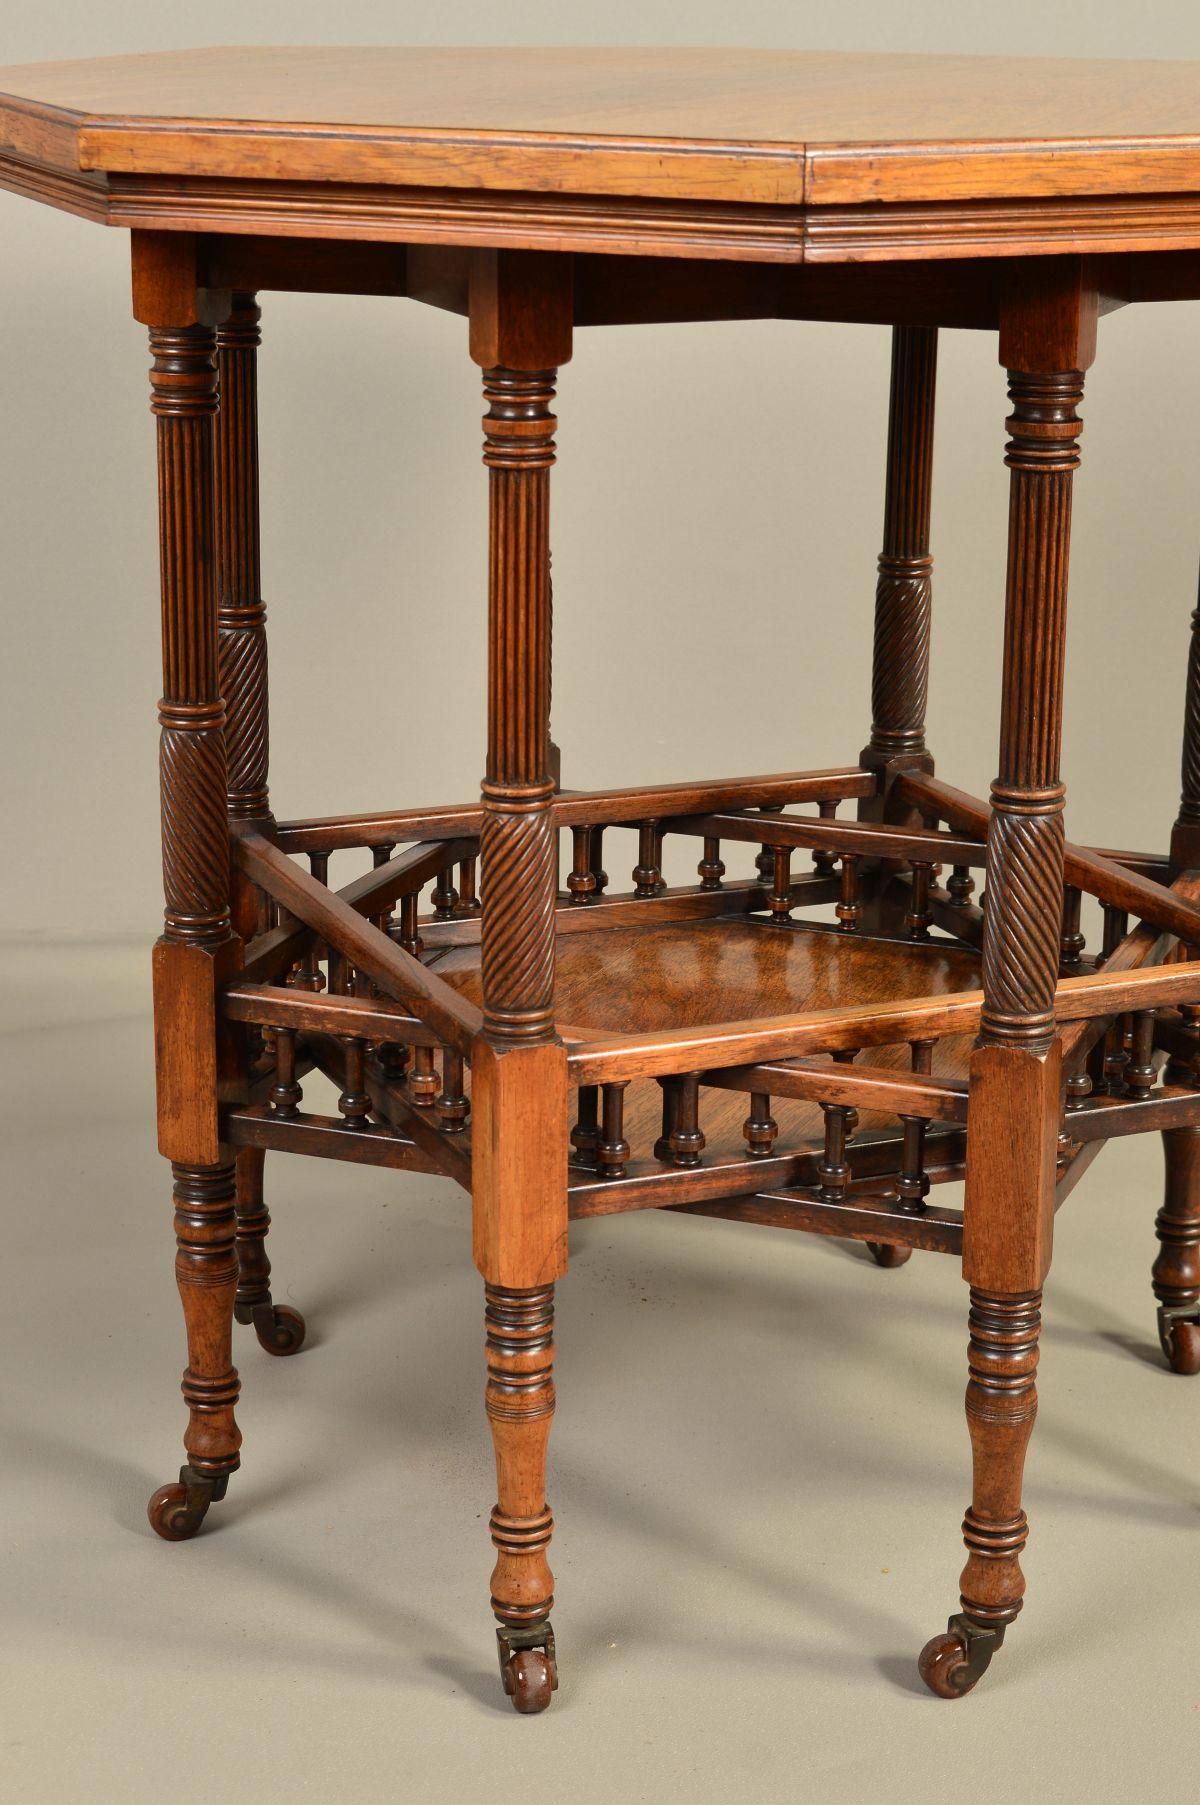 Hand-Crafted Gregory & Co Aesthetic Movement Eight Leg Octagonal Library Centre or Side Table